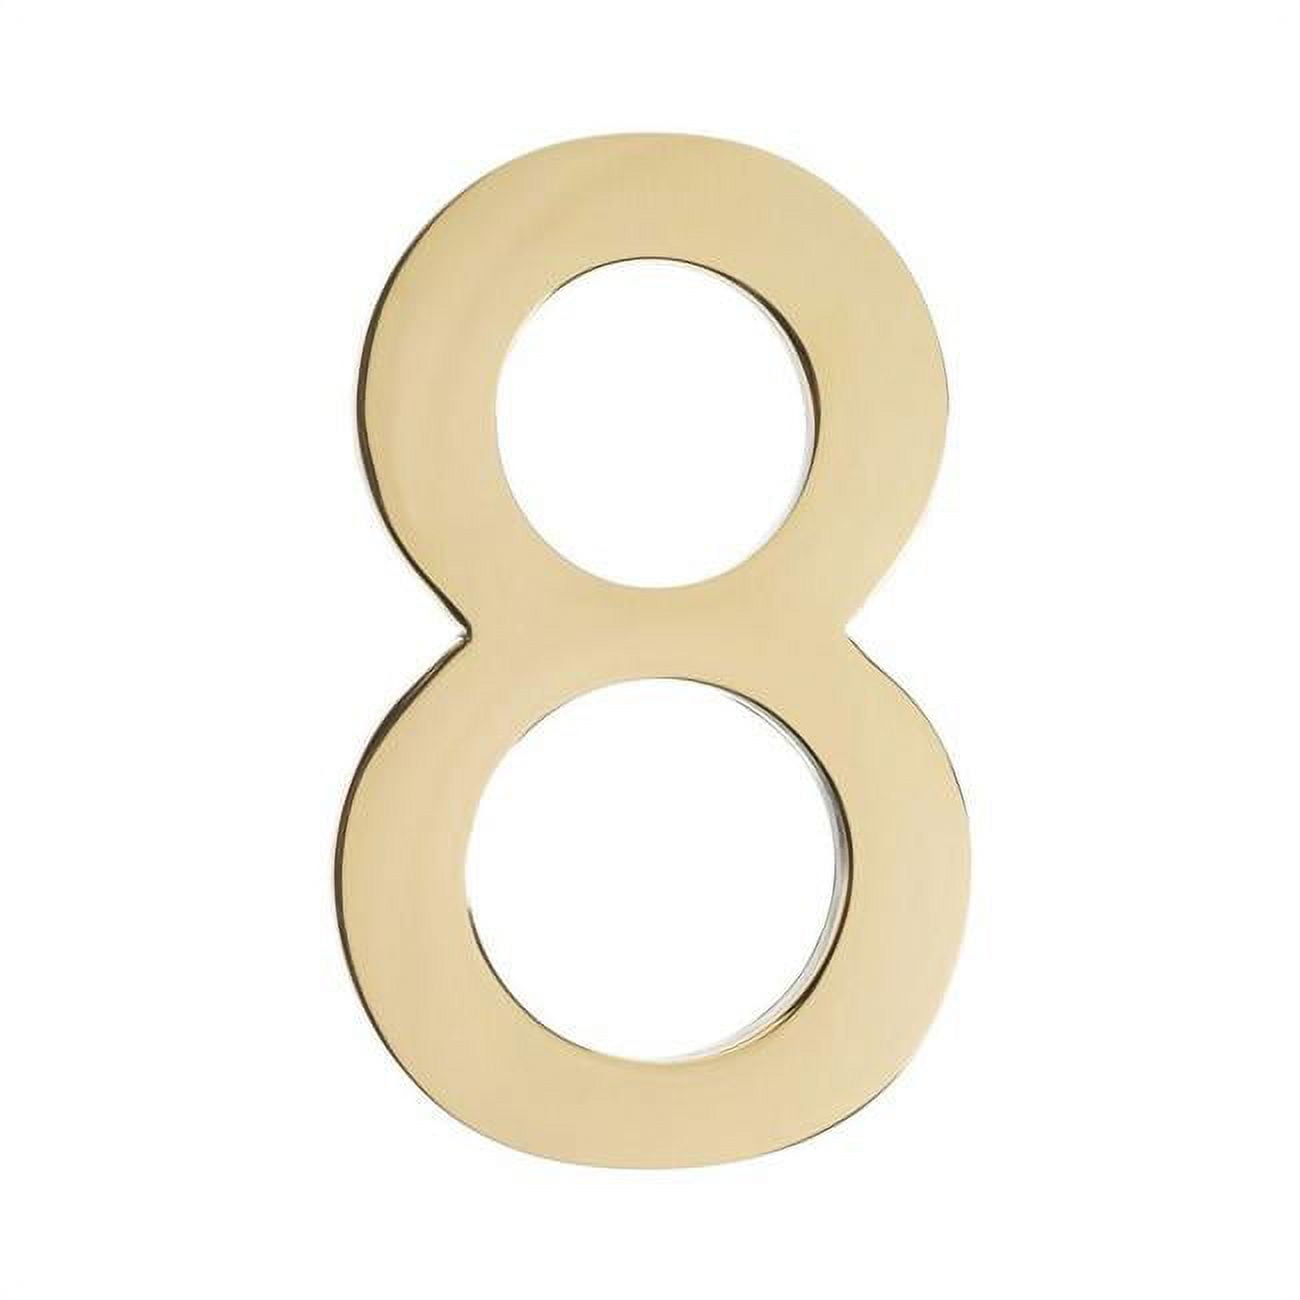 3585pb-8 House Number 8, Polished Brass - 5 In.